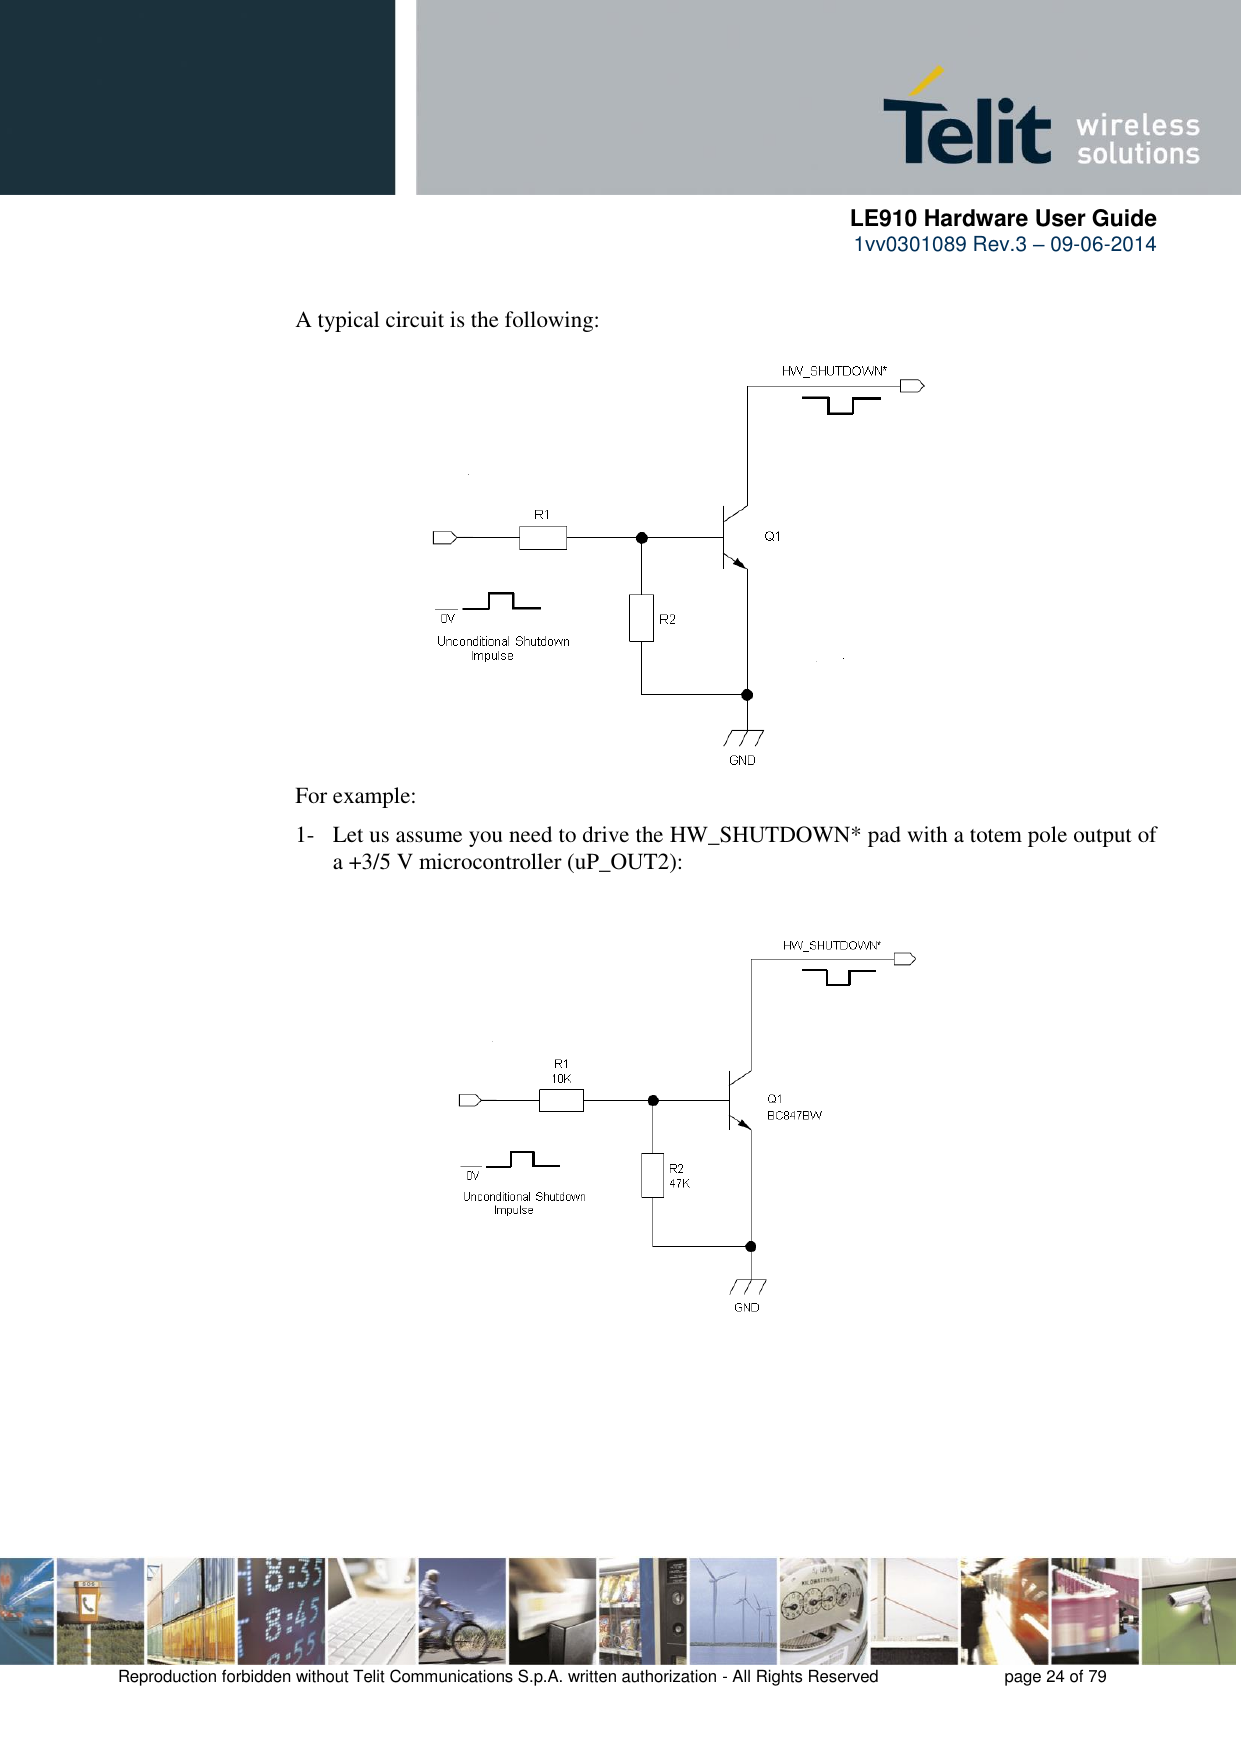      LE910 Hardware User Guide 1vv0301089 Rev.3 – 09-06-2014    Reproduction forbidden without Telit Communications S.p.A. written authorization - All Rights Reserved    page 24 of 79       A typical circuit is the following:     For example: 1- Let us assume you need to drive the HW_SHUTDOWN* pad with a totem pole output of a +3/5 V microcontroller (uP_OUT2): 